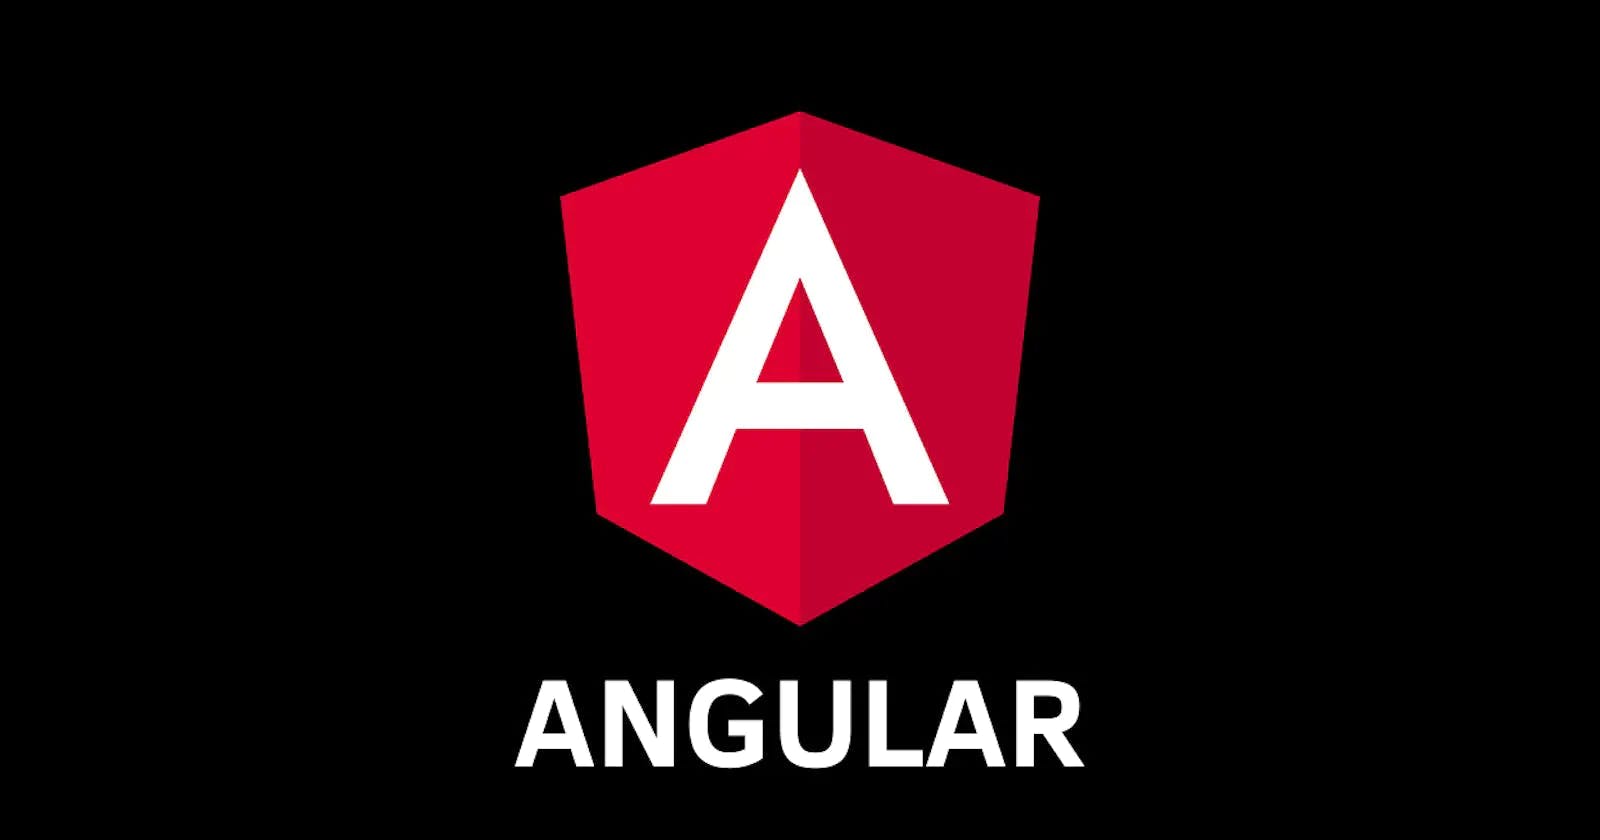 Routing in Angular